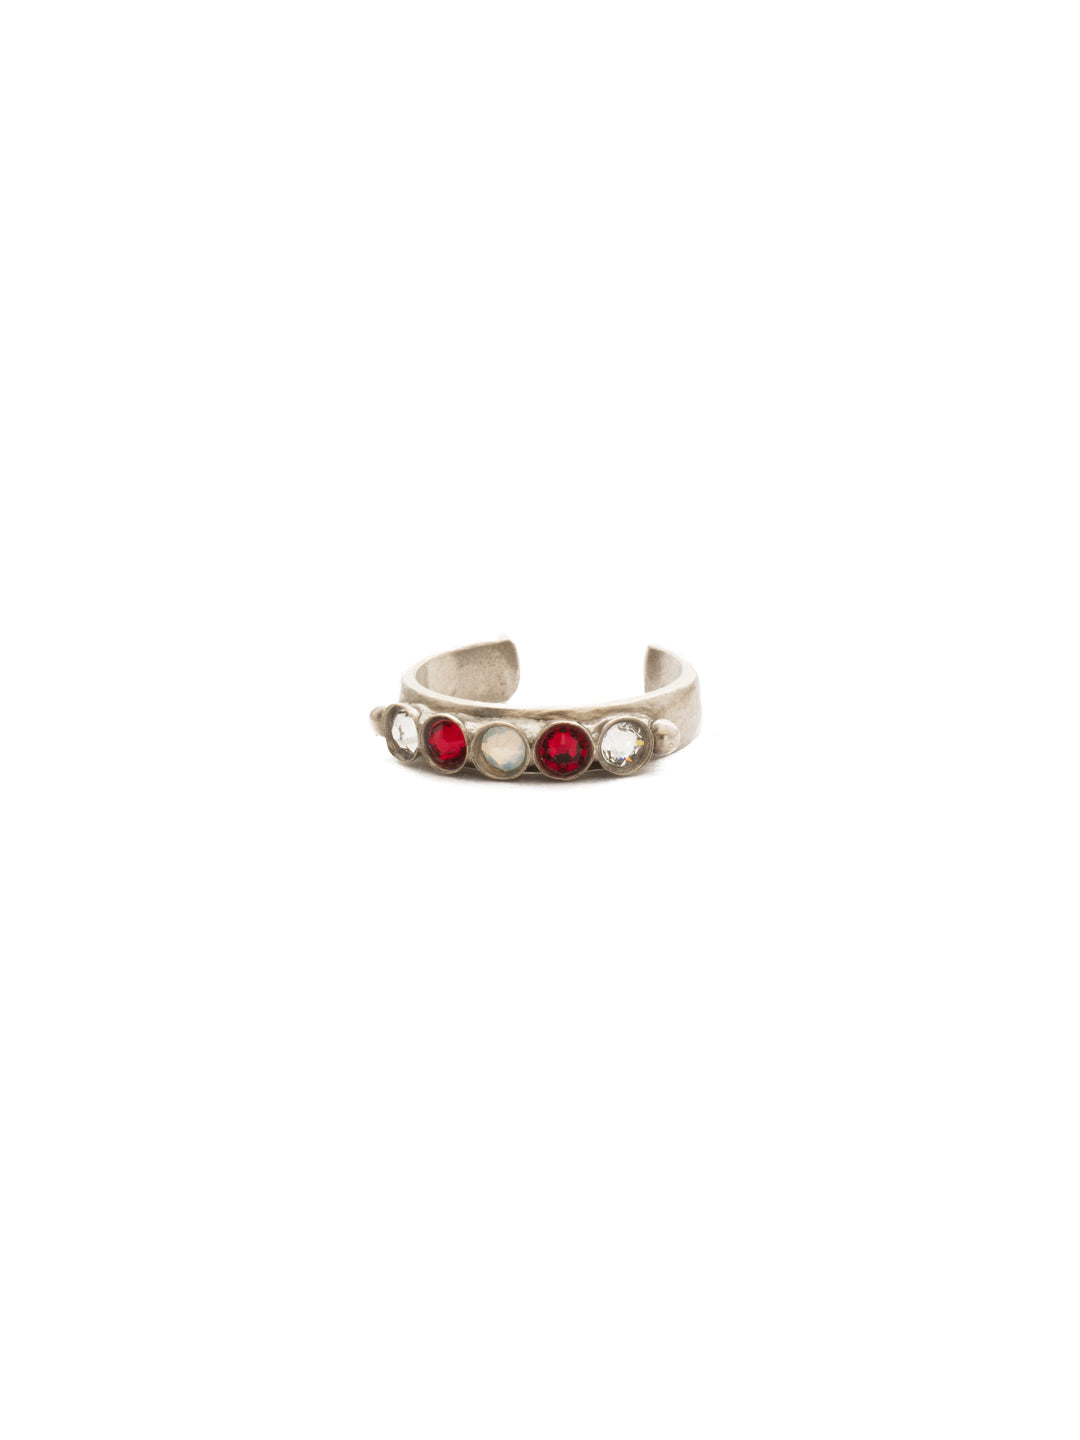 Dotted Line Ring - RDN106ASCP